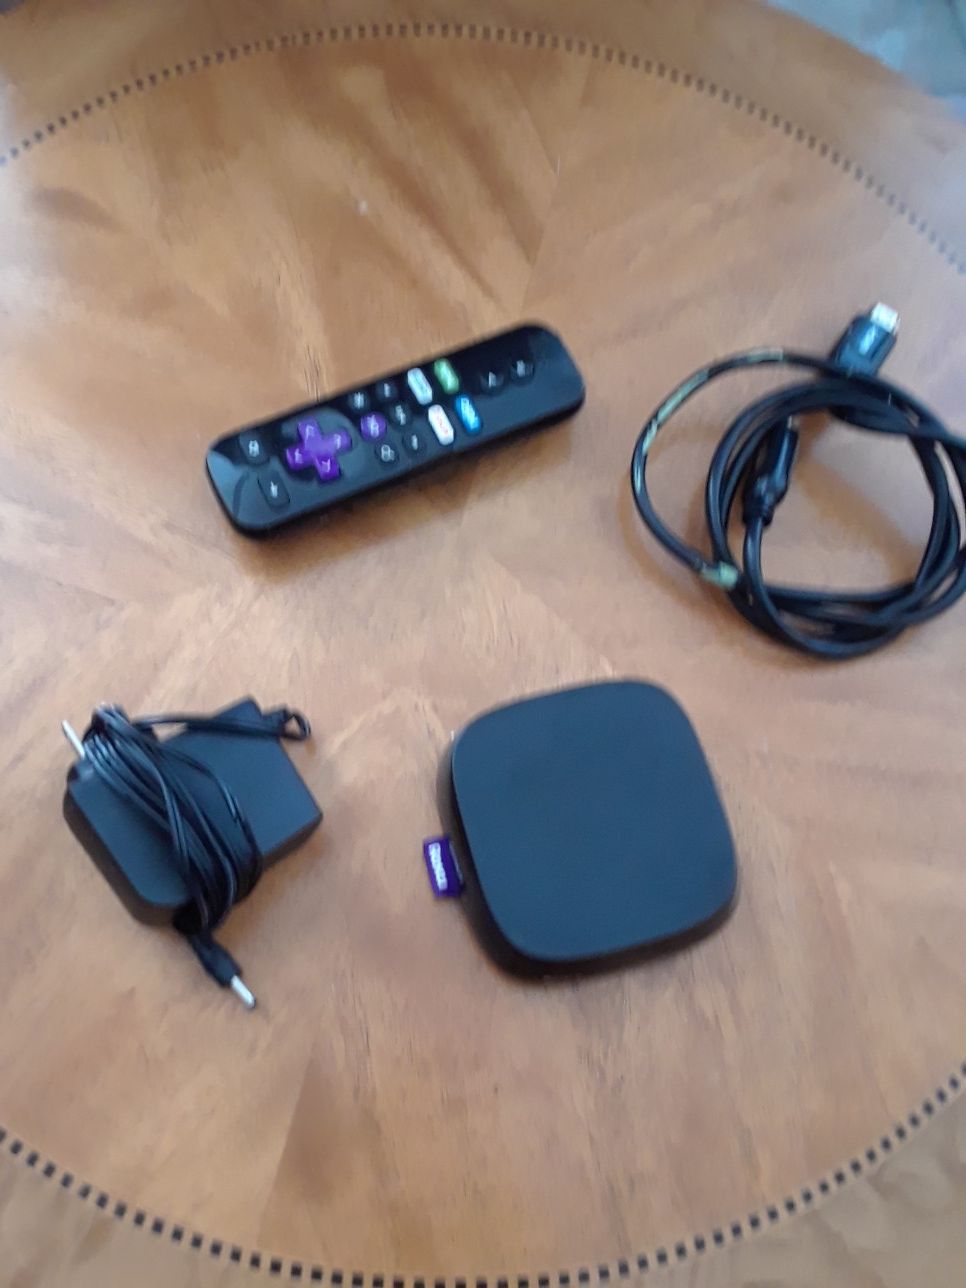 Roku 3 with remote and Hdmi